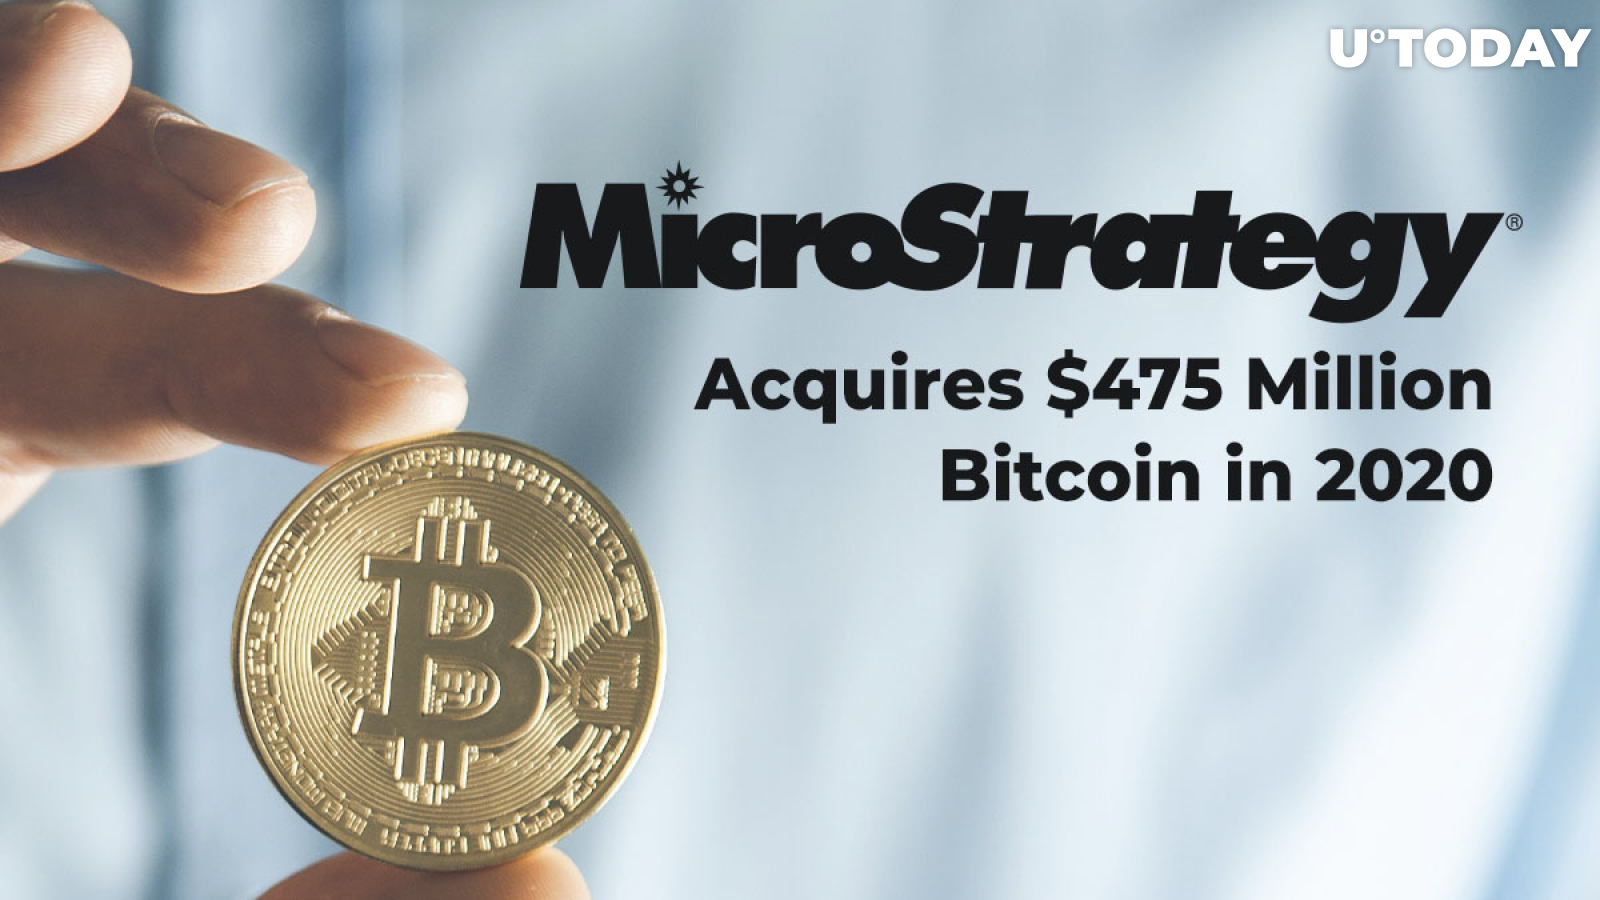 Microstrategy Grabs $475 Million in Bitcoin in 2020 – Double BTC Amount Mined in November 